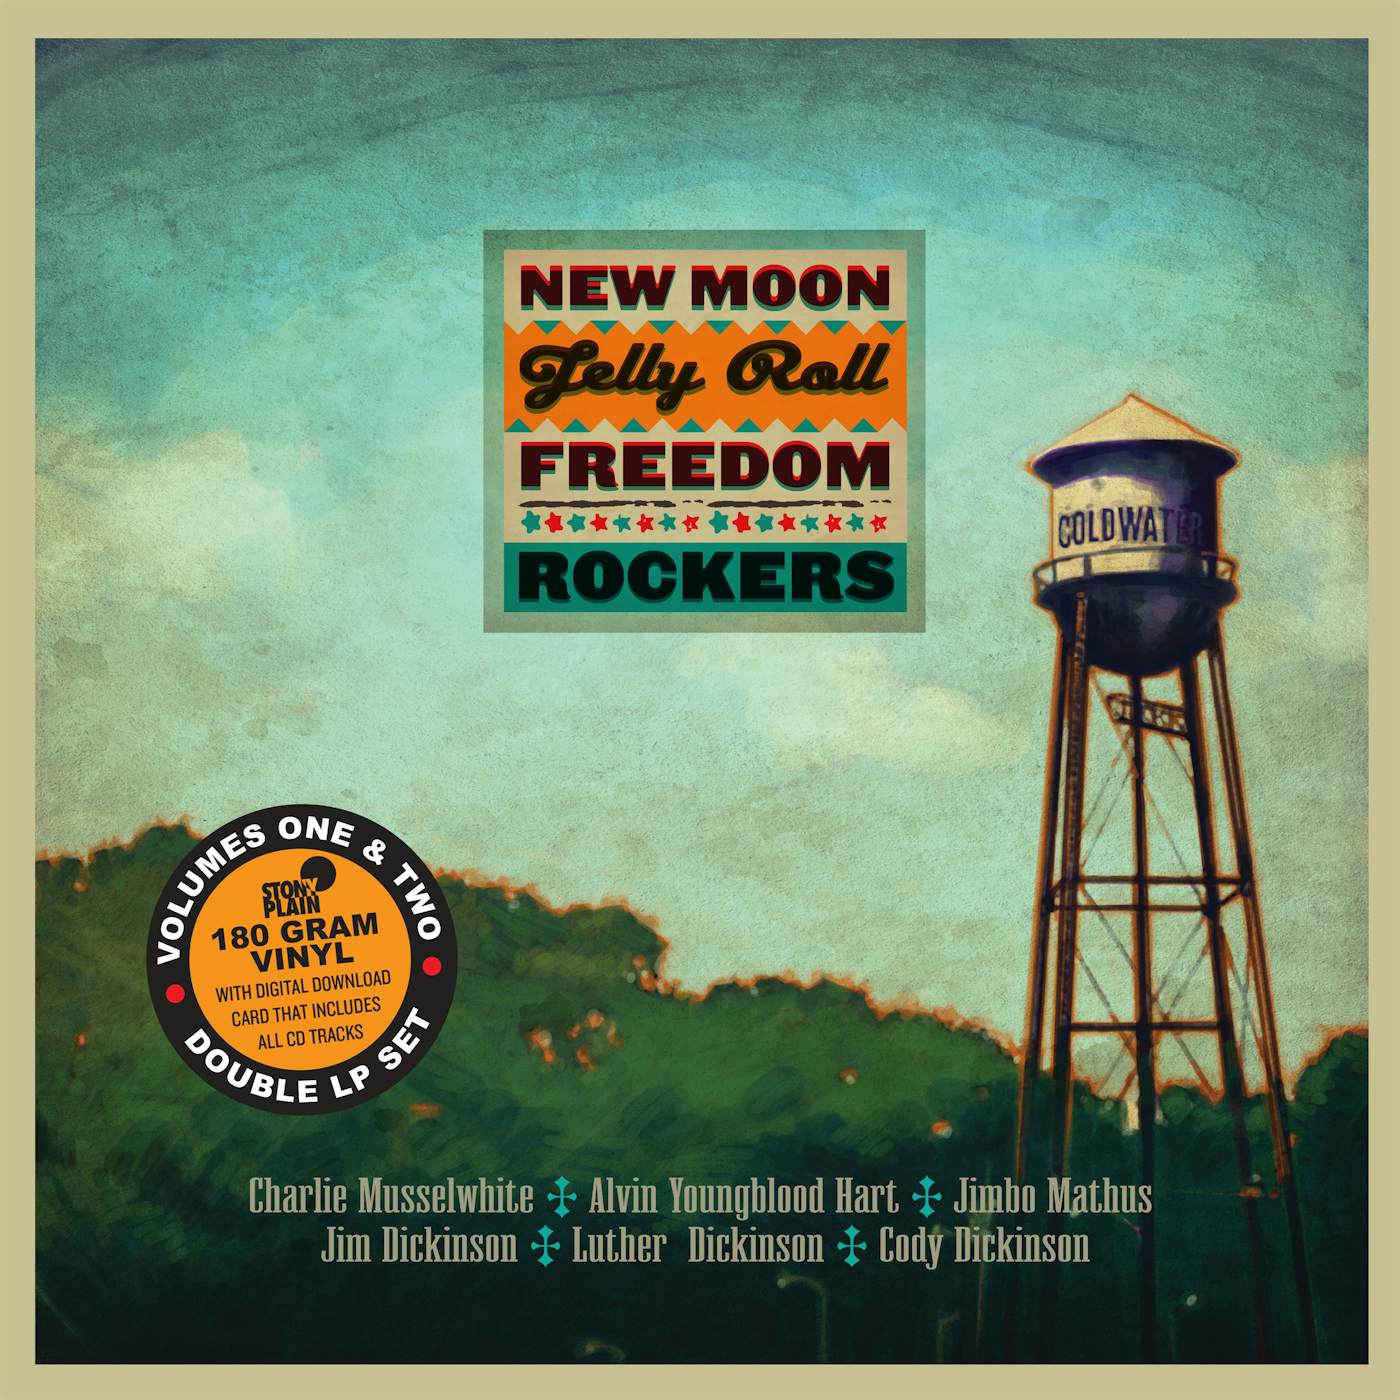 New Moon Jelly Roll Freedom Rockers VOLUME 1 AND 2 Vinyl Record